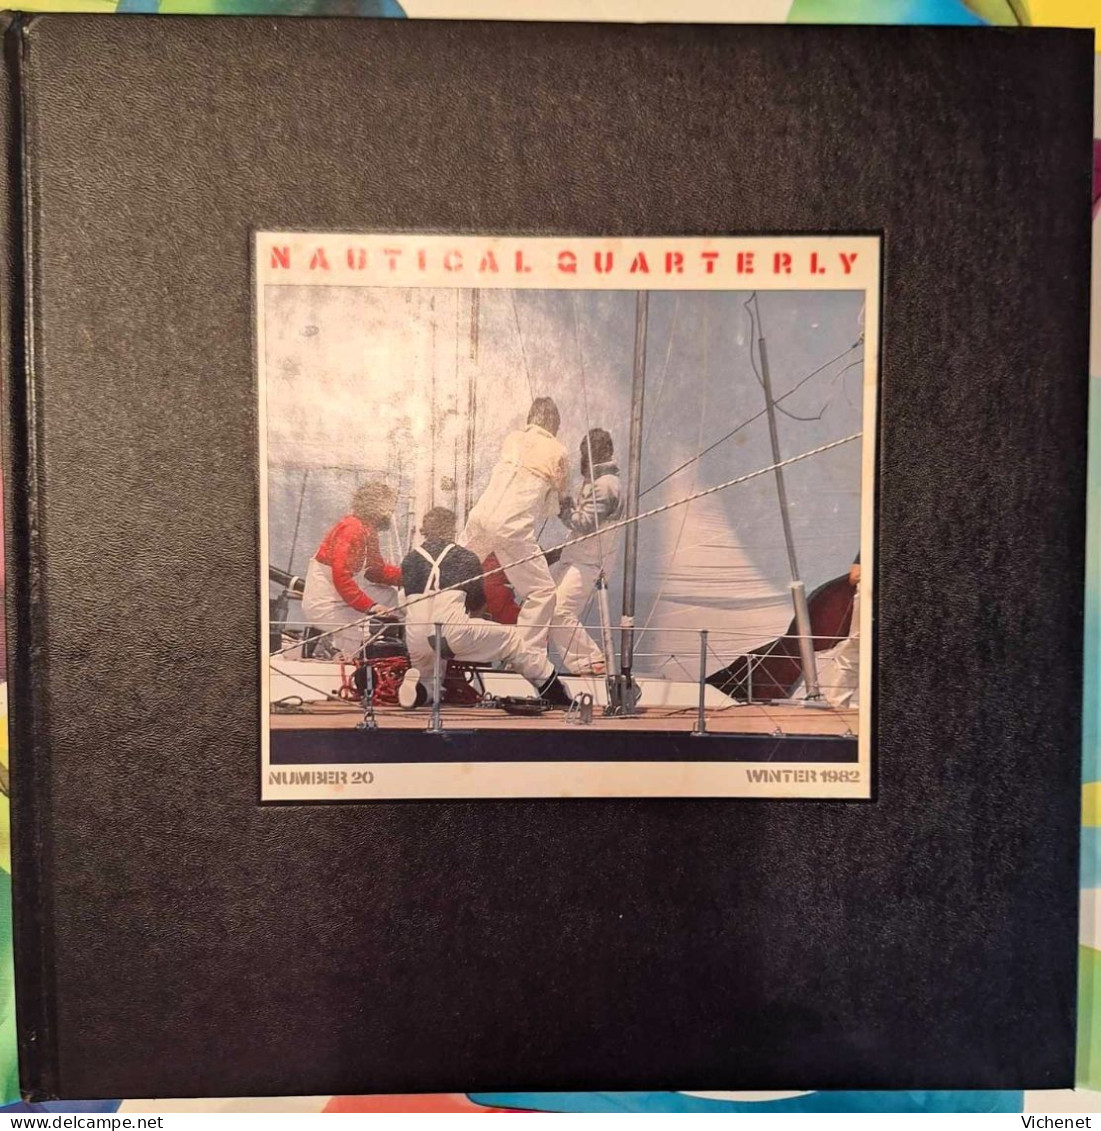 Nautical Quaterly - Number 20 - Winter 1982 - Voyage/ Exploration